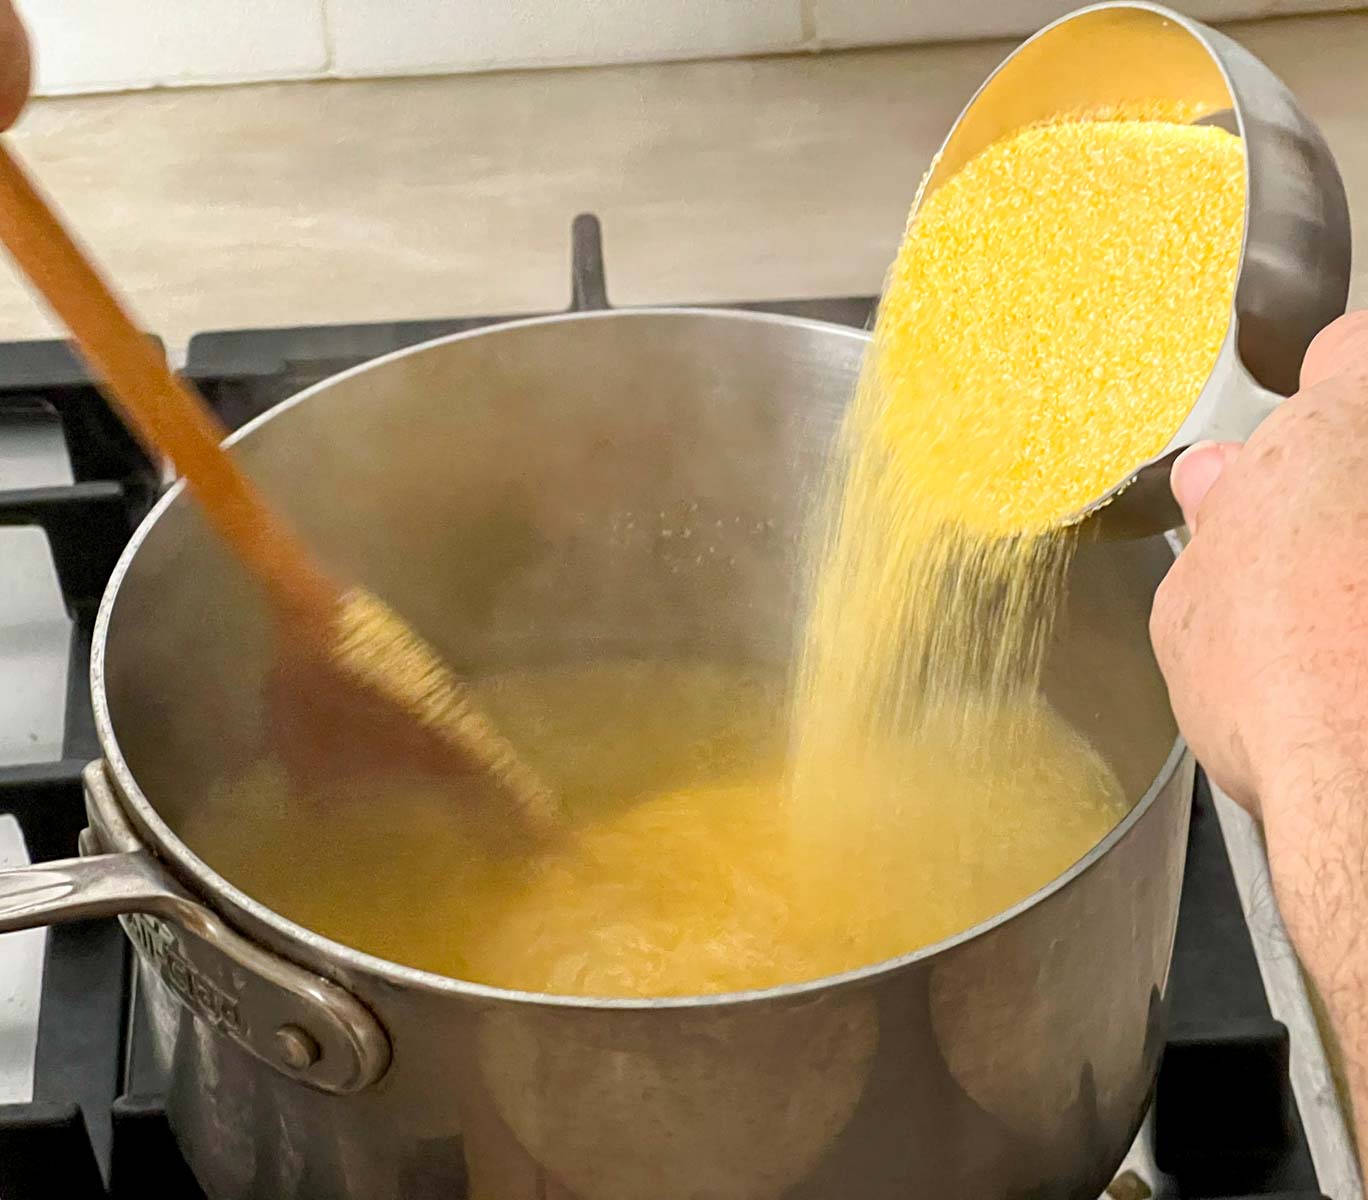 Polenta being added in a thin stream to boiling water